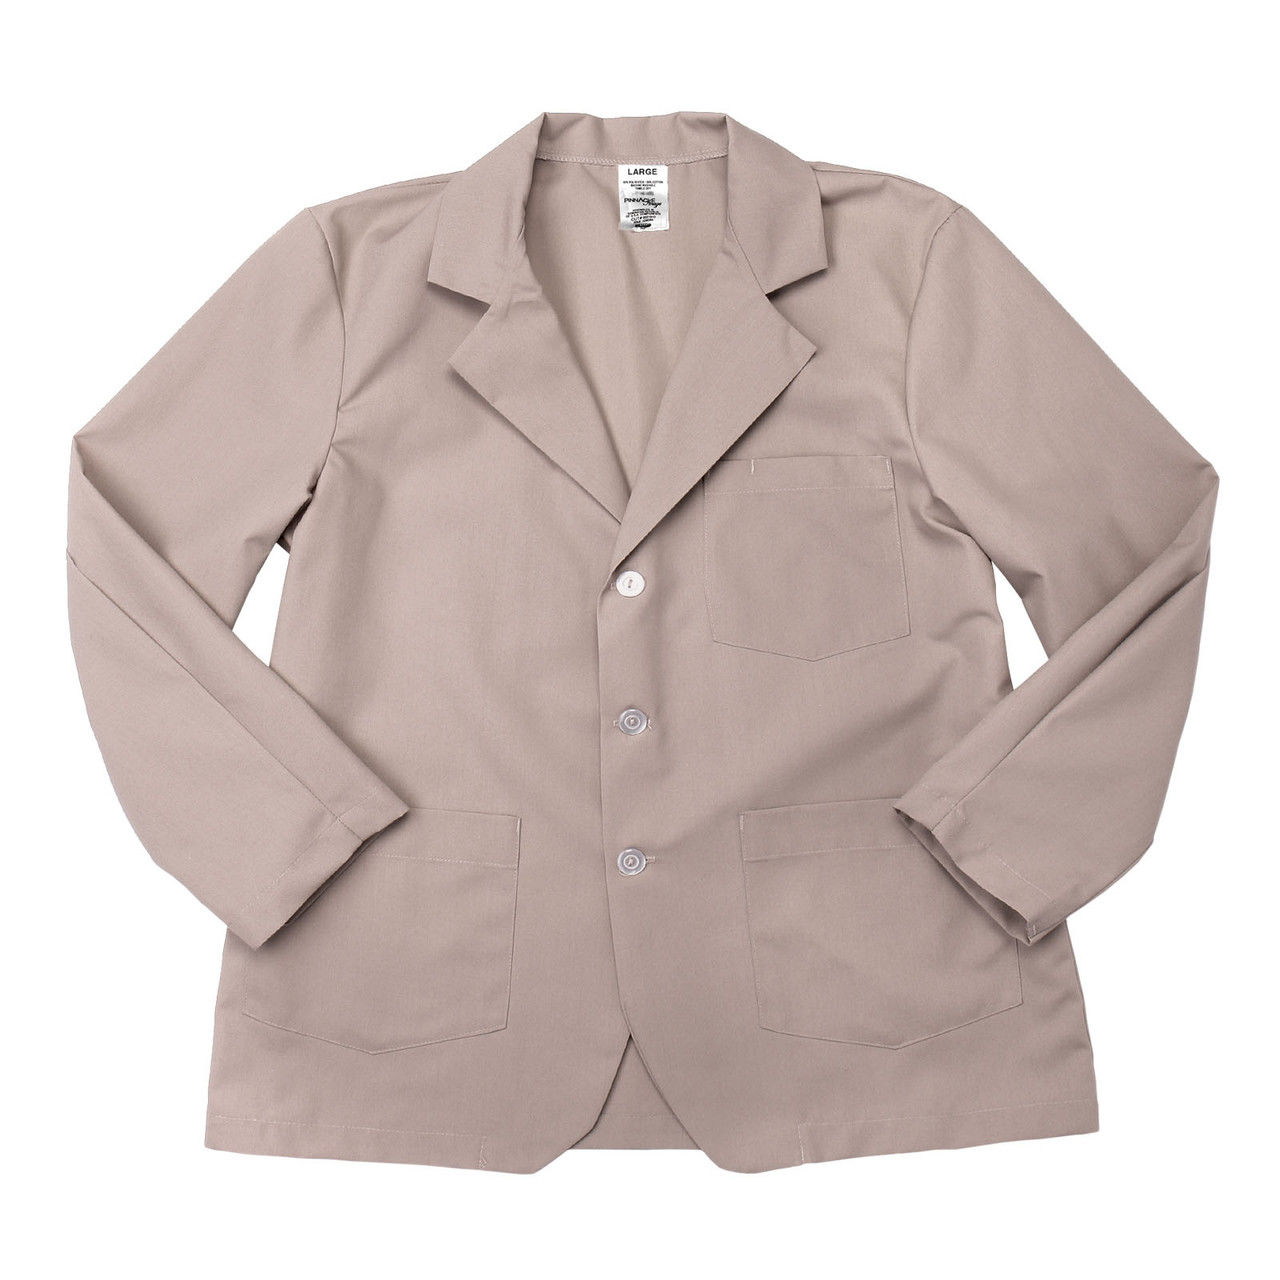 What are the key features of the Tan Lapel/Counter Coat?